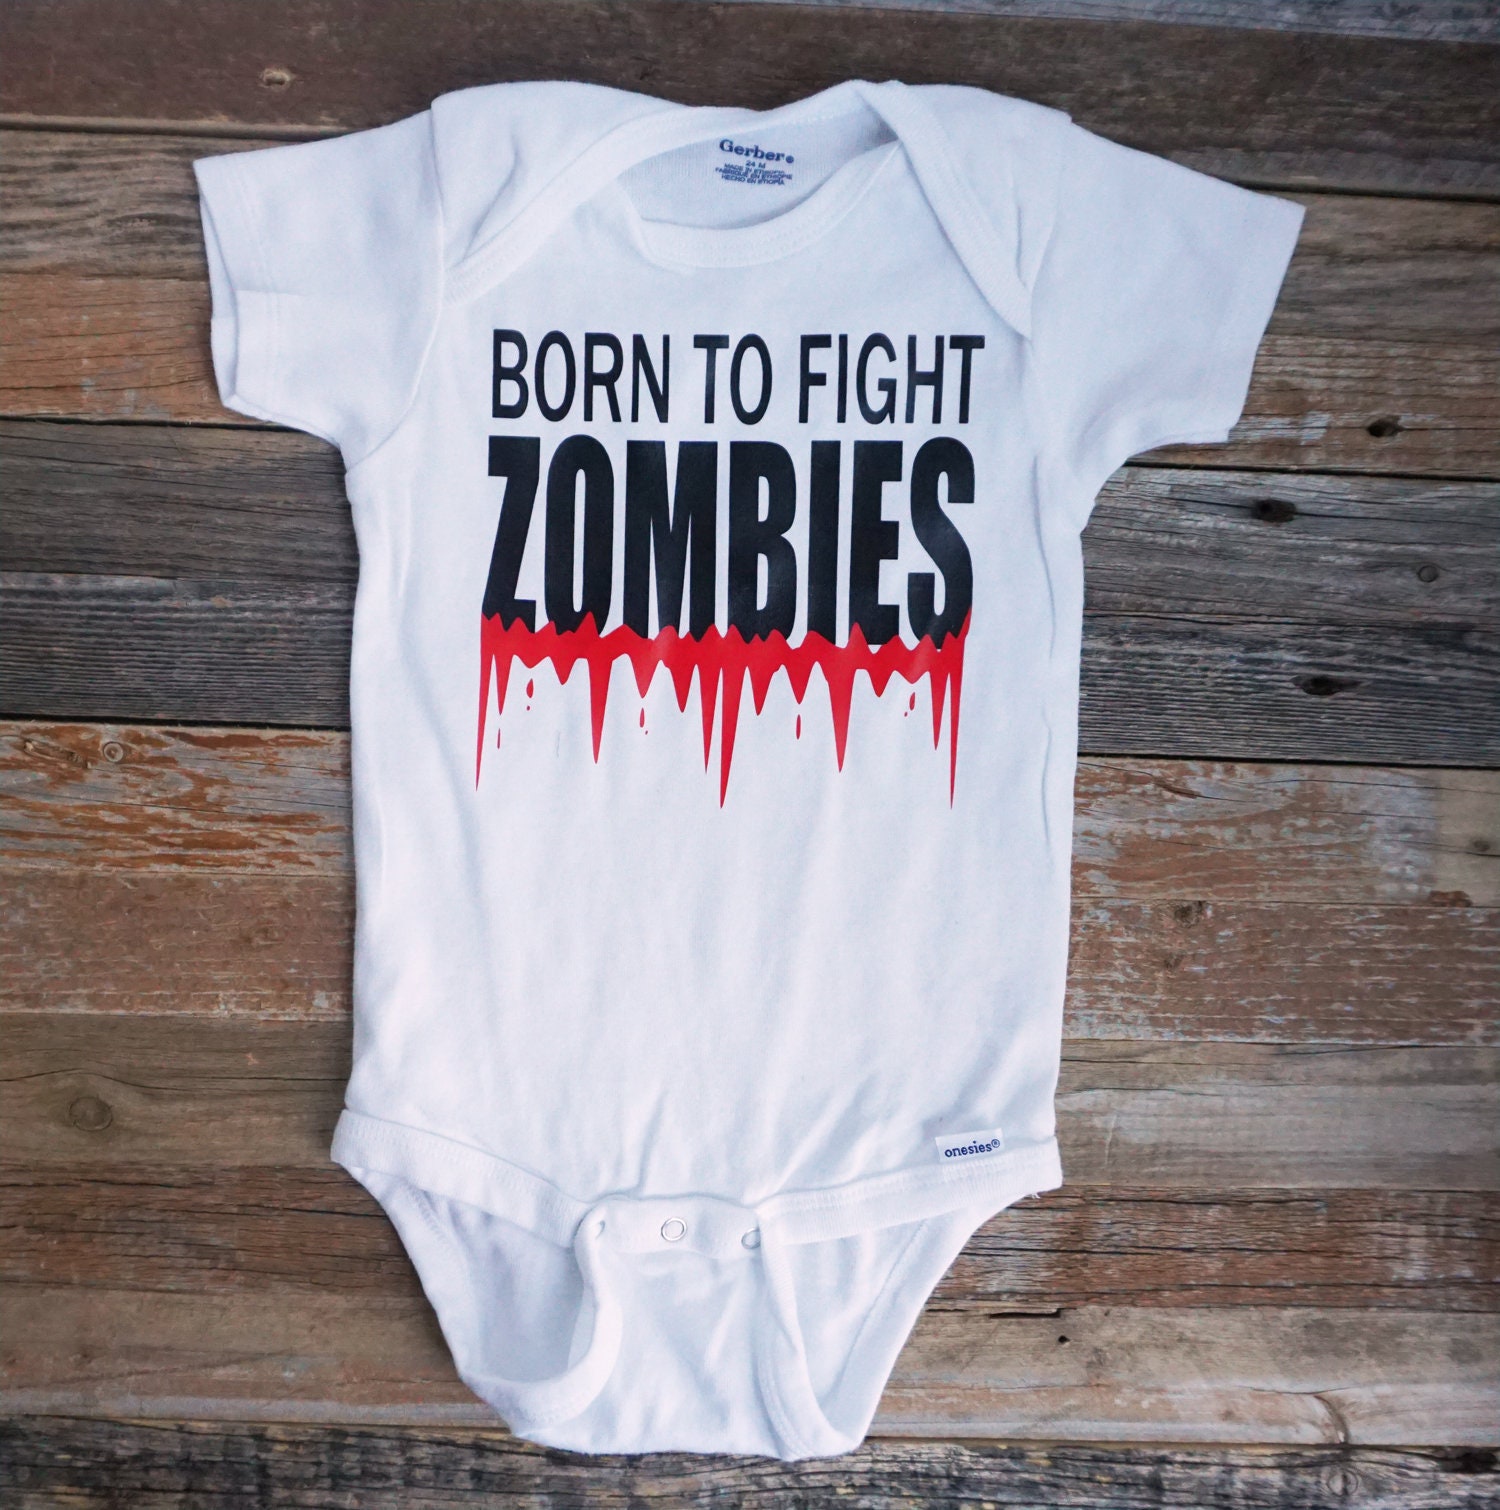 Born to fight zombies gift for zombie lover Funny zombie shirt funny tee Walking Dead Zombie shirt Halloween onesie